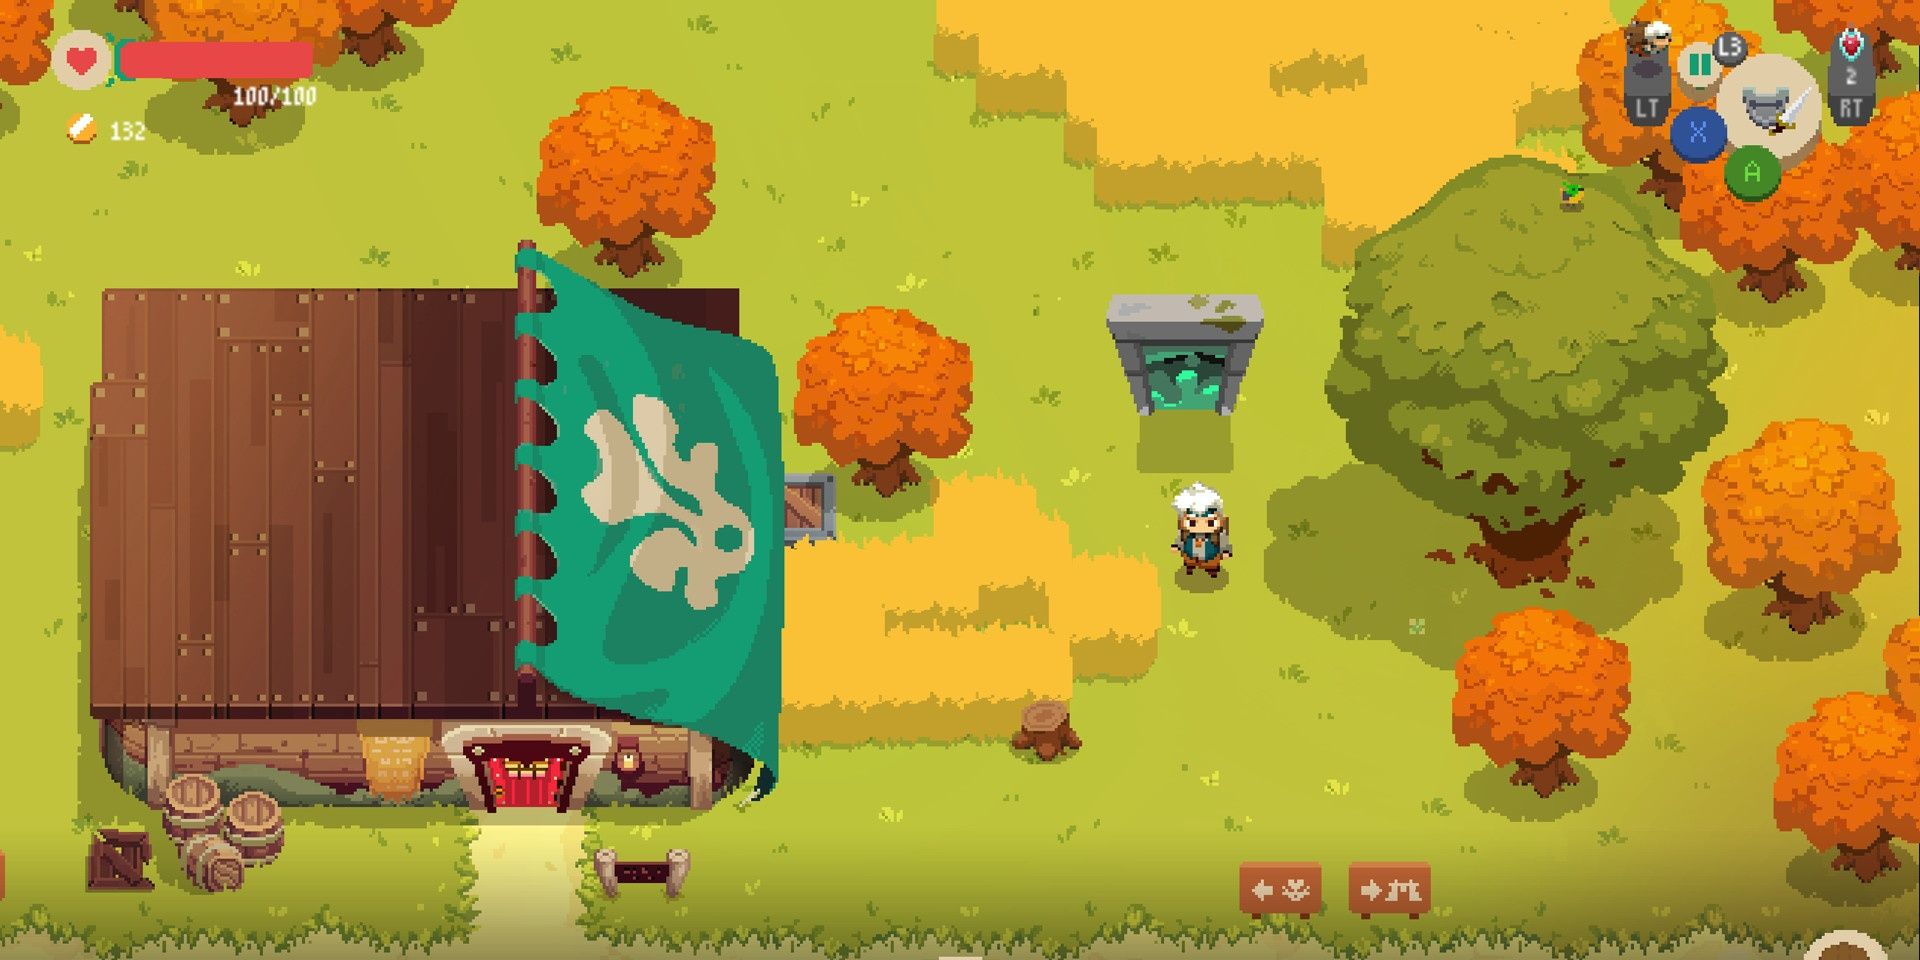 The shopkeeper of Moonlighter standing in front of a portal next to their shop that will lead to a new realm